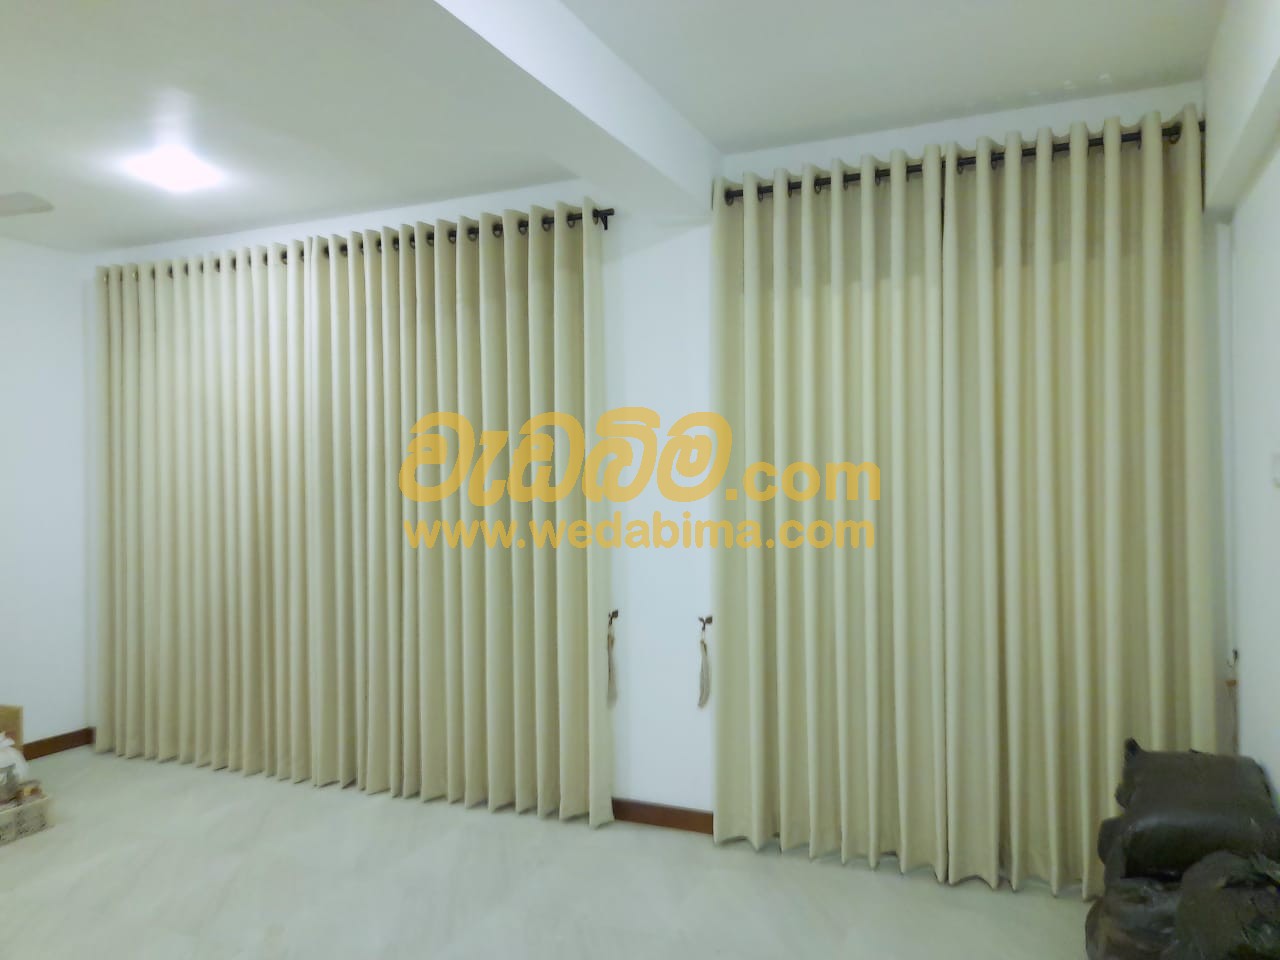 Curtain Designers - Colombo